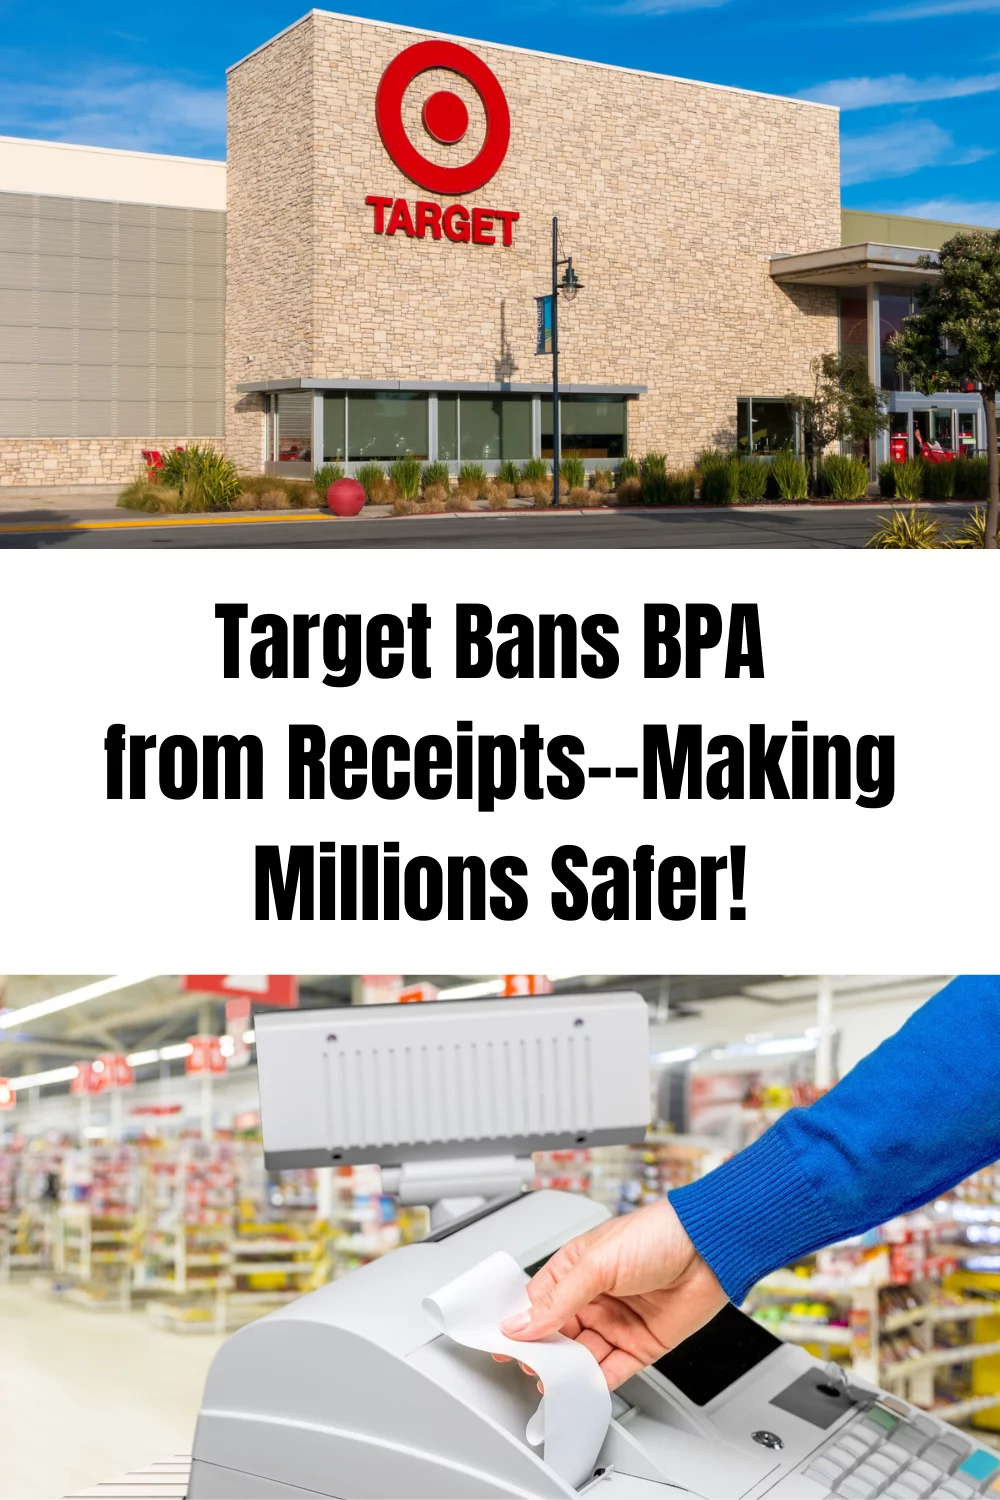 VICTORY! Target Bans BPA from Receipts Making Millions Safer!